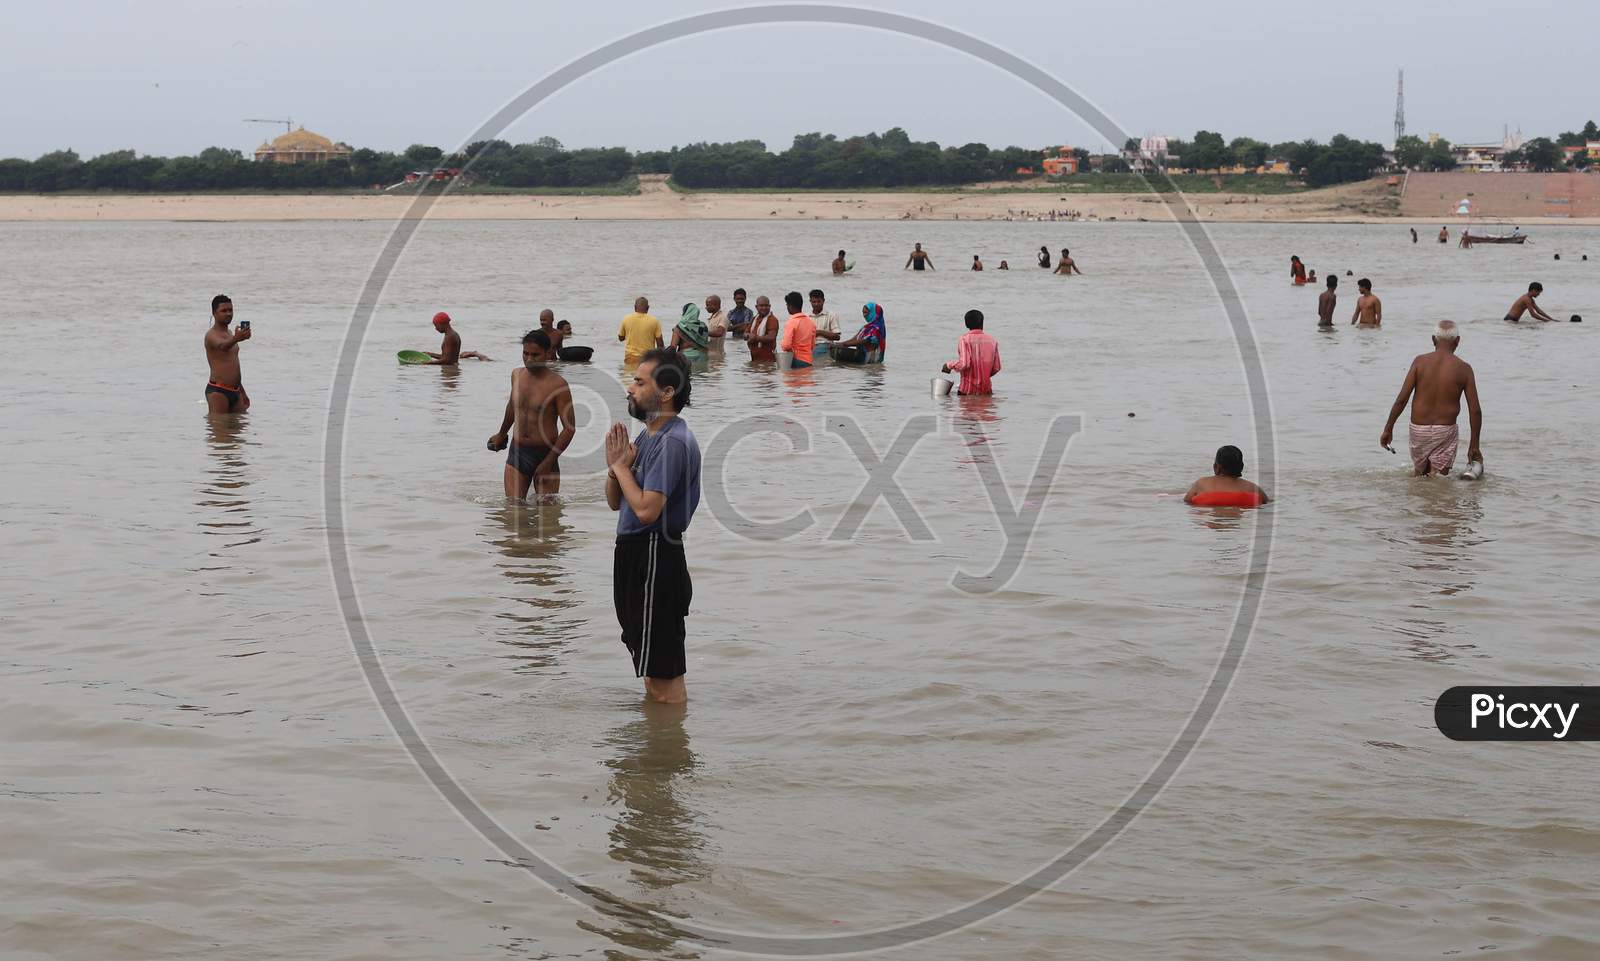 Devotees take a dip in the Holy River Ganga on the first Monday of the holy month of Shravan in Prayagraj, Uttar Pradesh on July 13, 2020